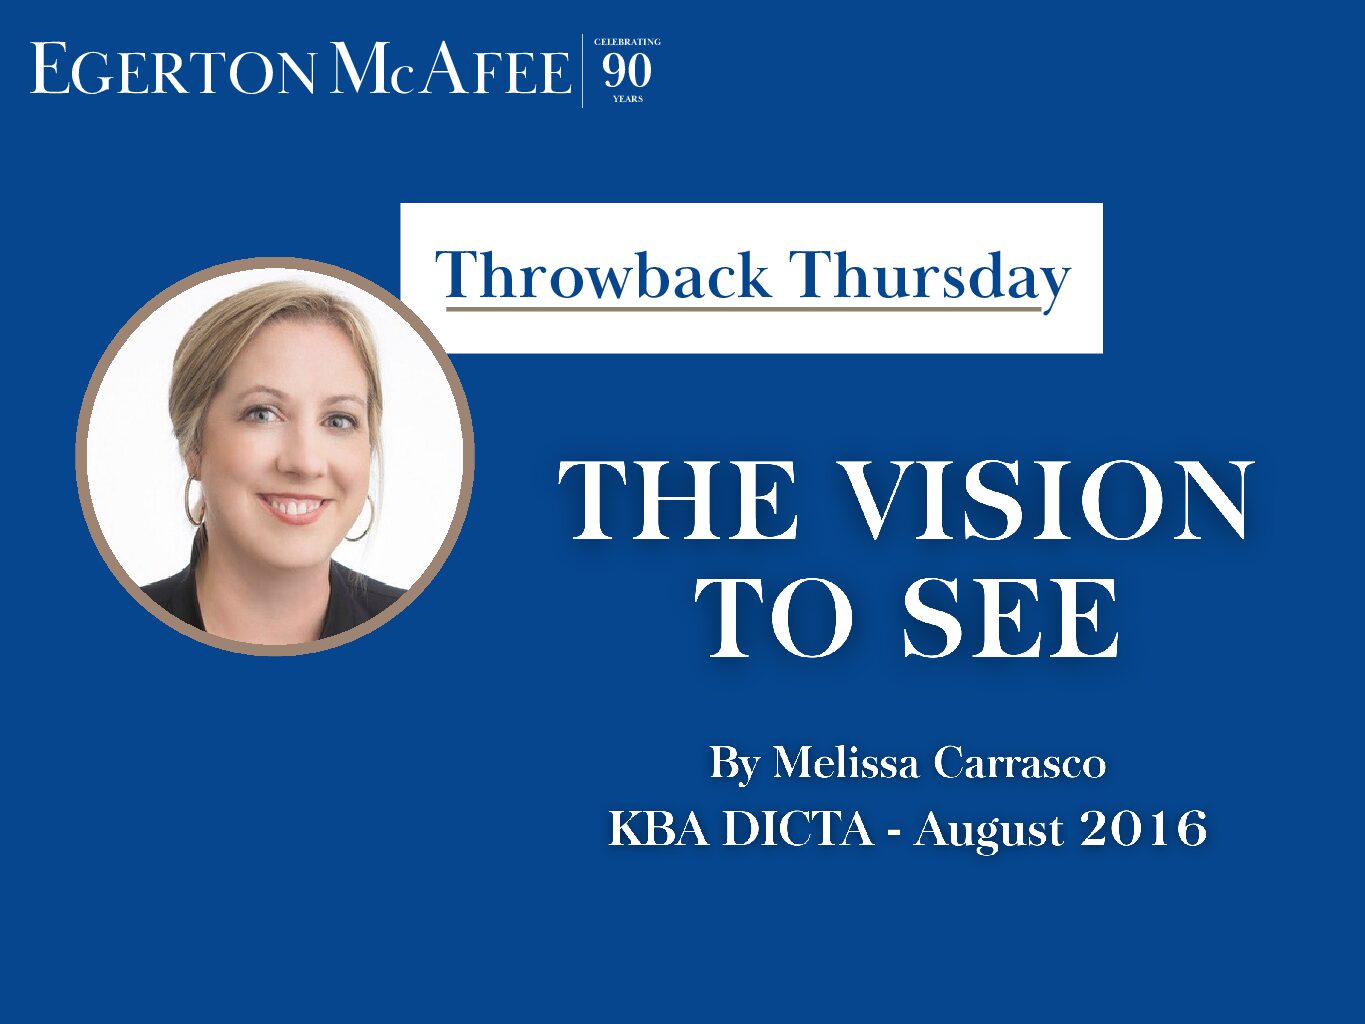 Throwback Thursday – THE VISION TO SEE by Melissa Carrasco